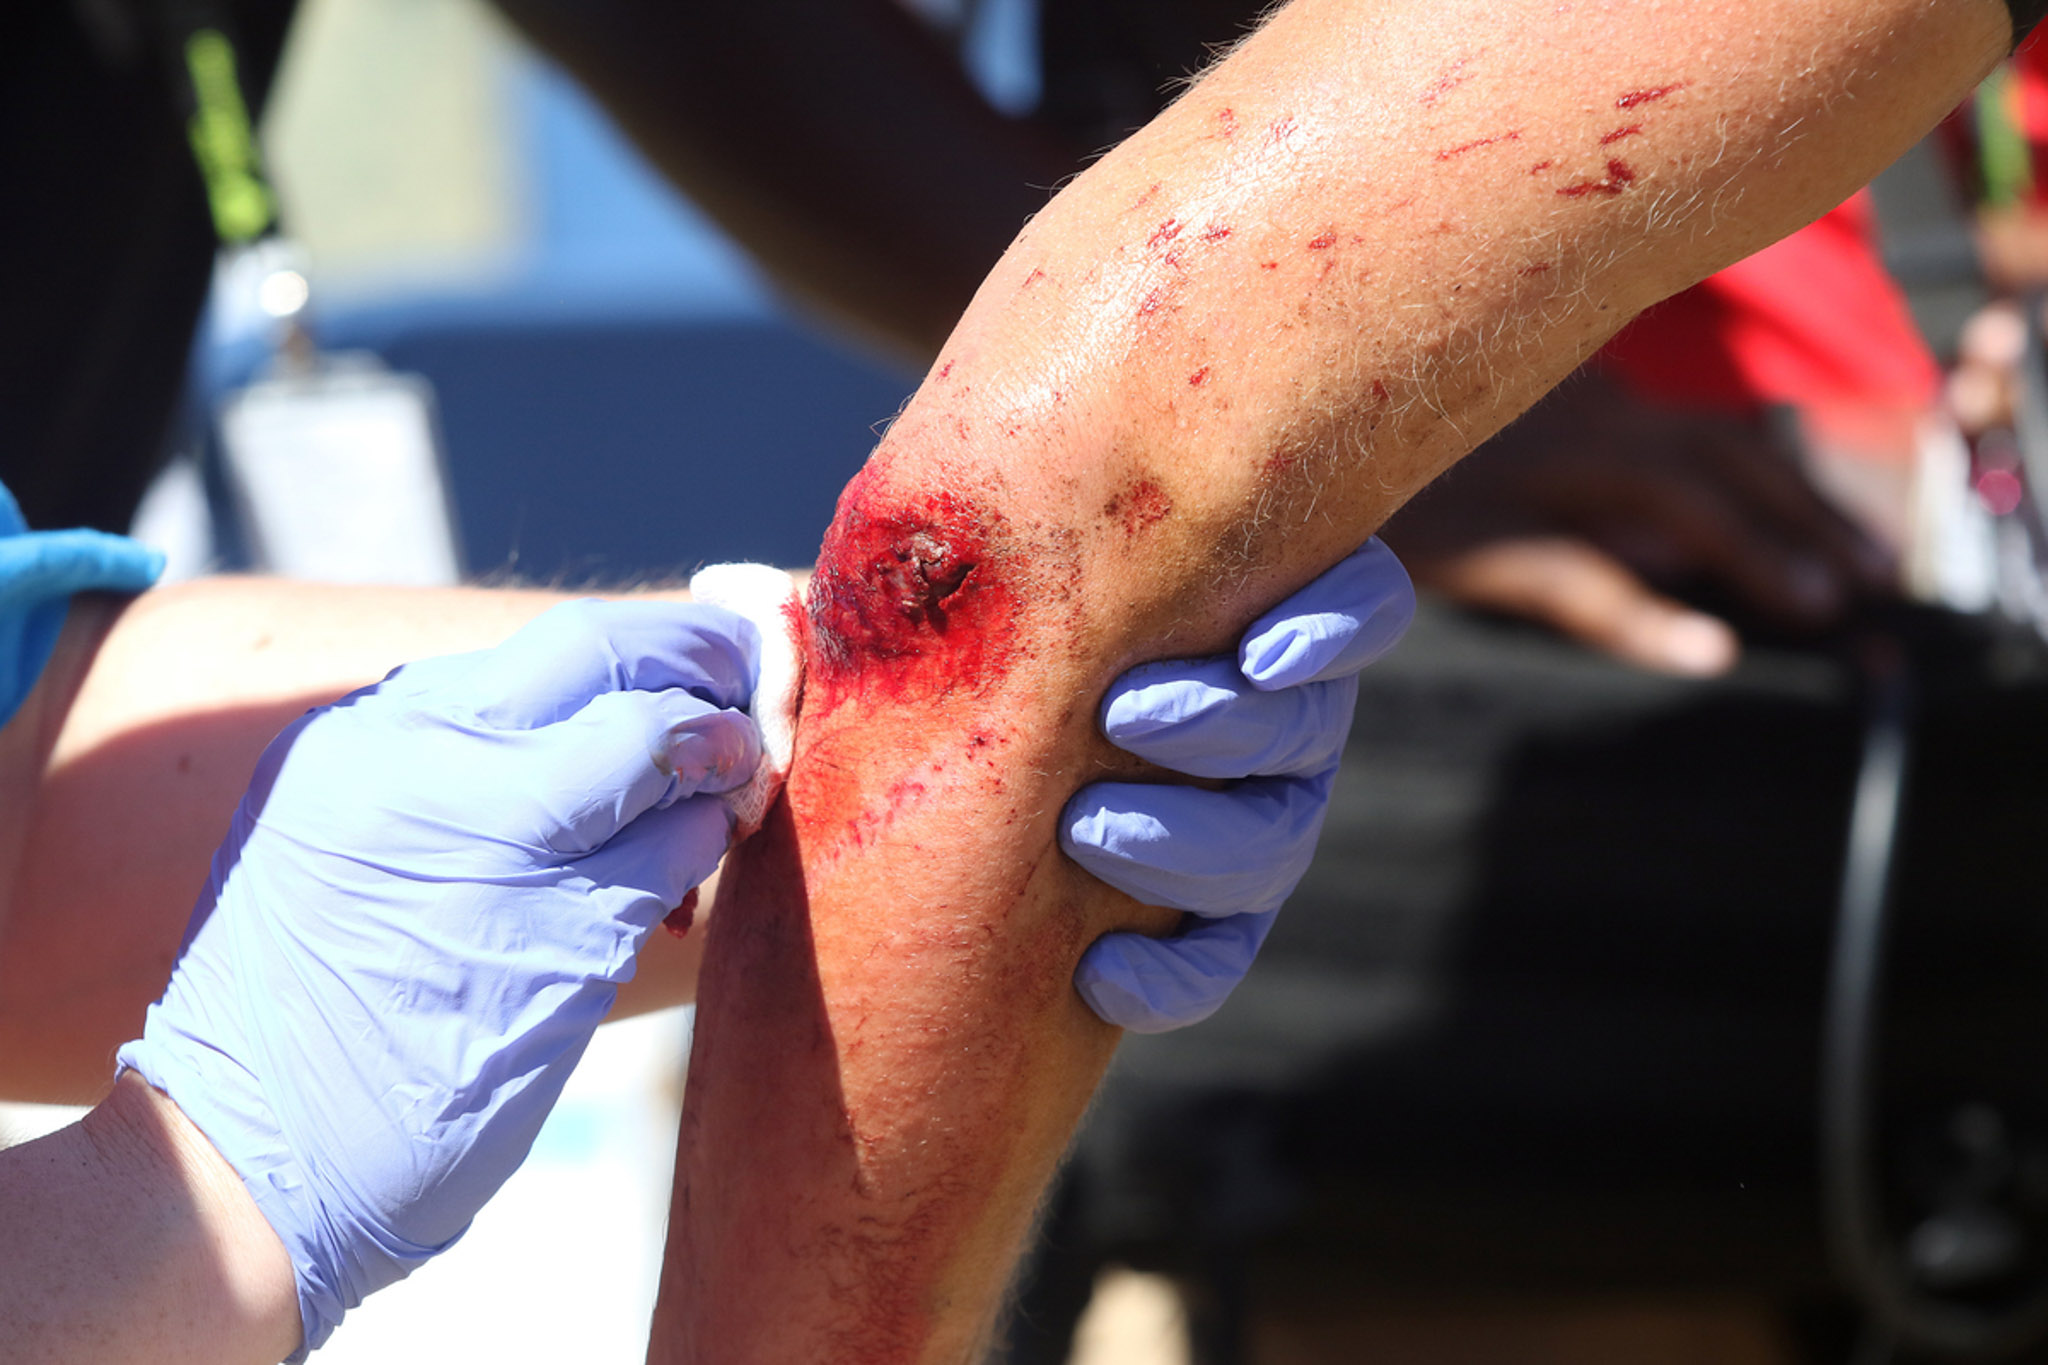 Kristian Hynek of Topeak Ergon Racing gets his injured arm cleaned by the medical staff after falling during stage 3 of the 2016 Absa Cape Epic Mountain Bike stage race held from Saronsberg Wine Estate in Tulbagh to the Cape Peninsula University of Technology in Wellington, South Africa on the 16th March 2016 Photo by Shaun Roy/Cape Epic/SPORTZPICS PLEASE ENSURE THE APPROPRIATE CREDIT IS GIVEN TO THE PHOTOGRAPHER AND SPORTZPICS ALONG WITH THE ABSA CAPE EPIC {ace2016}